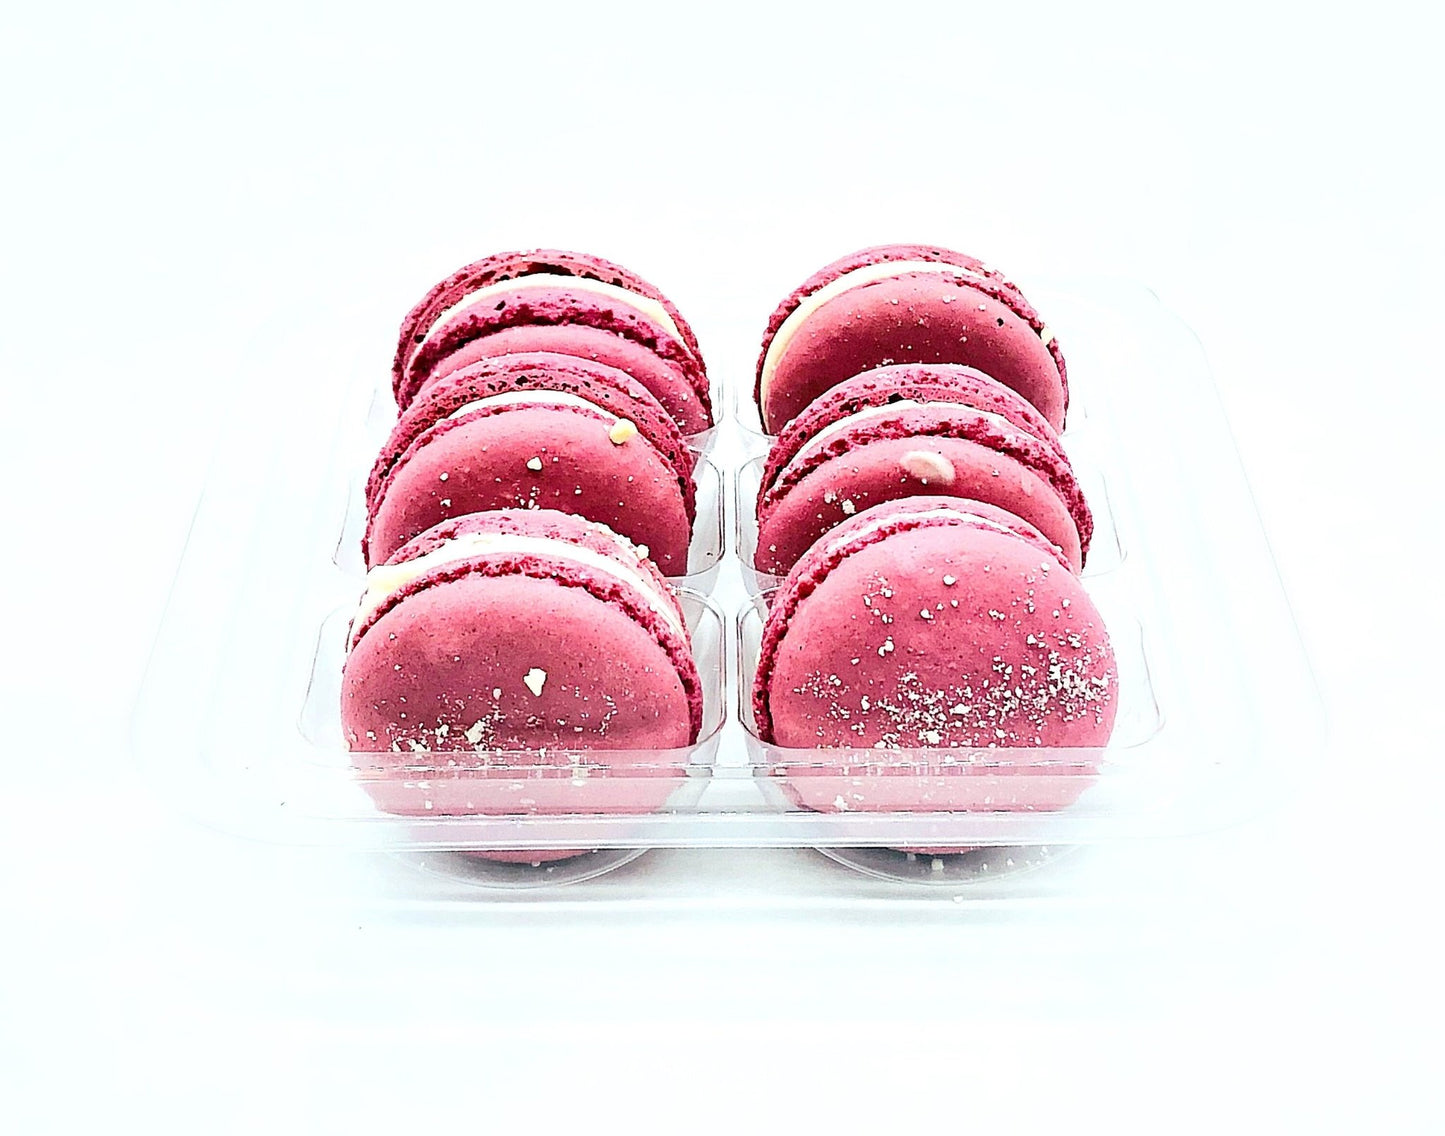 Cranberry Sauce French Macarons | Perfect for your next celebratory events. - Macaron Centrale12 pack